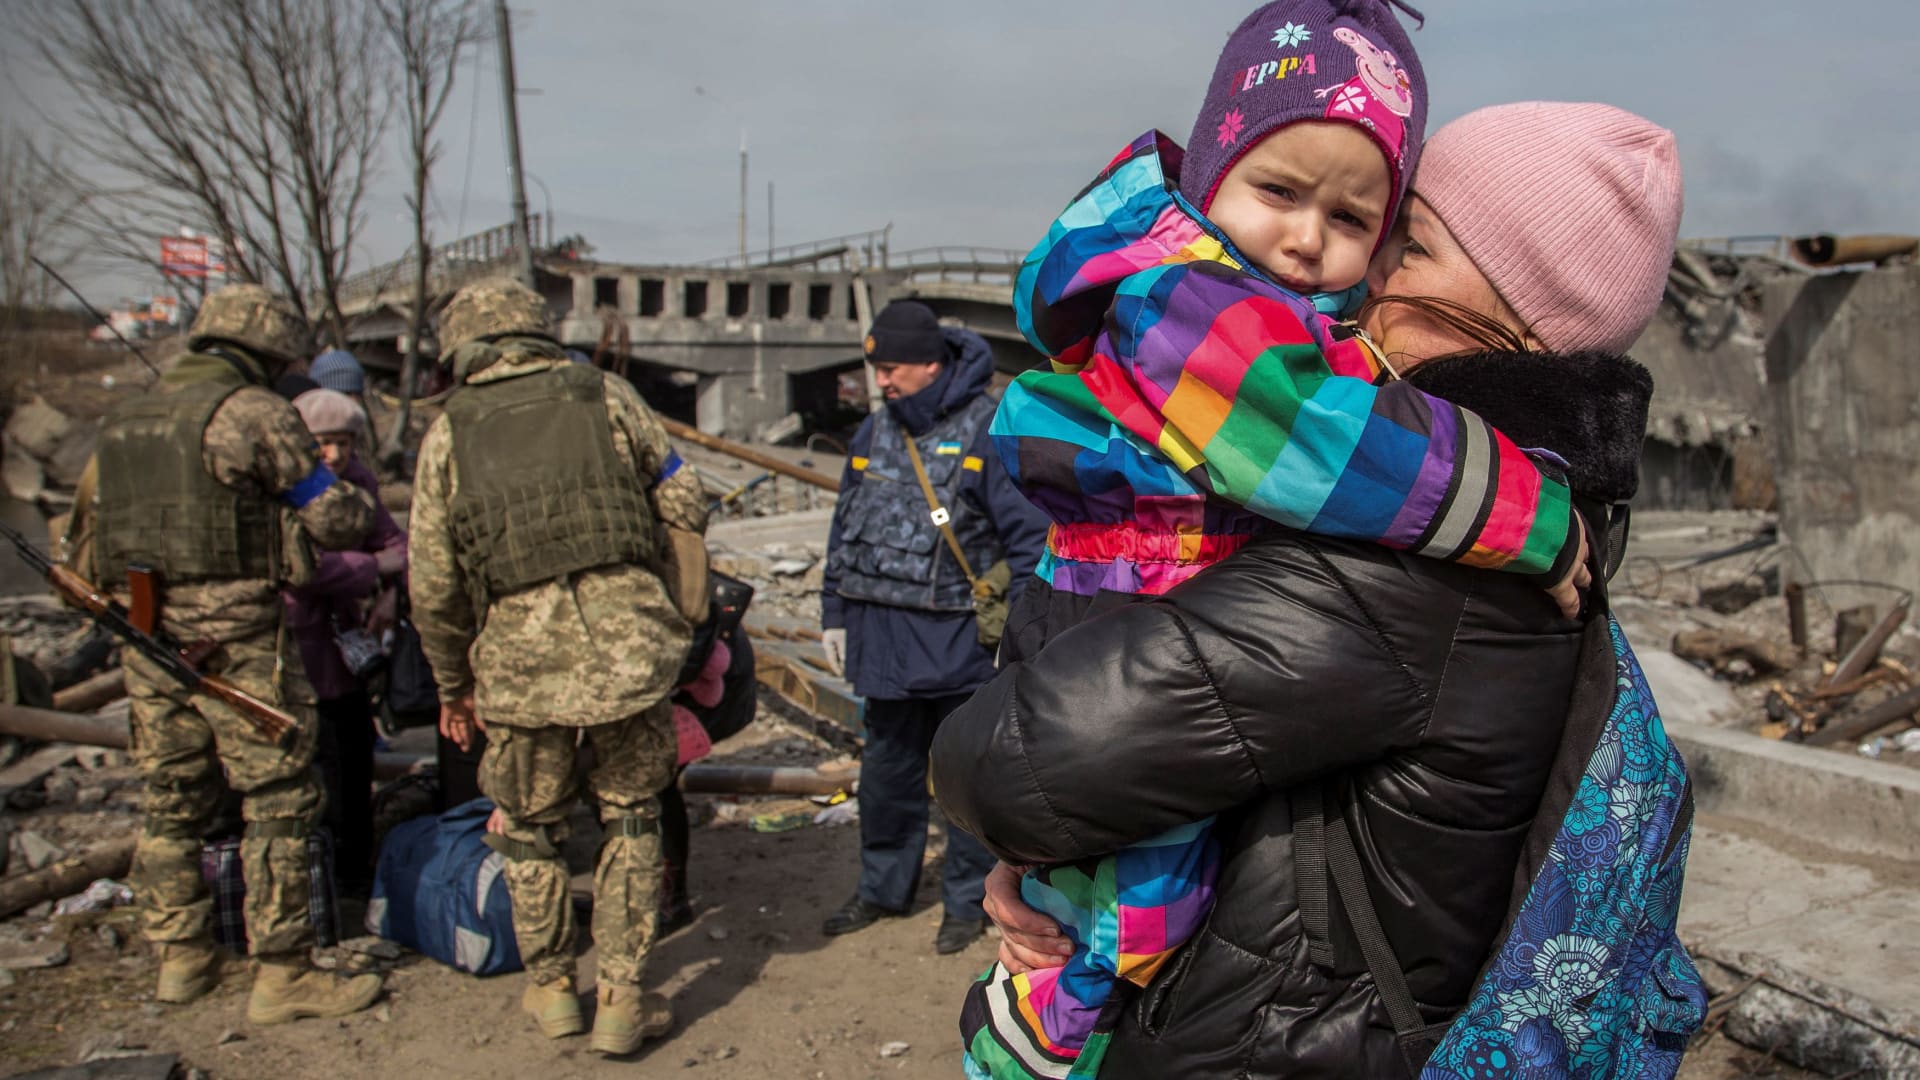 A woman holds a child next to a destroyed bridge during an evacuation from Irpin, outside of Kyiv, Ukraine, on March 28, 2022.